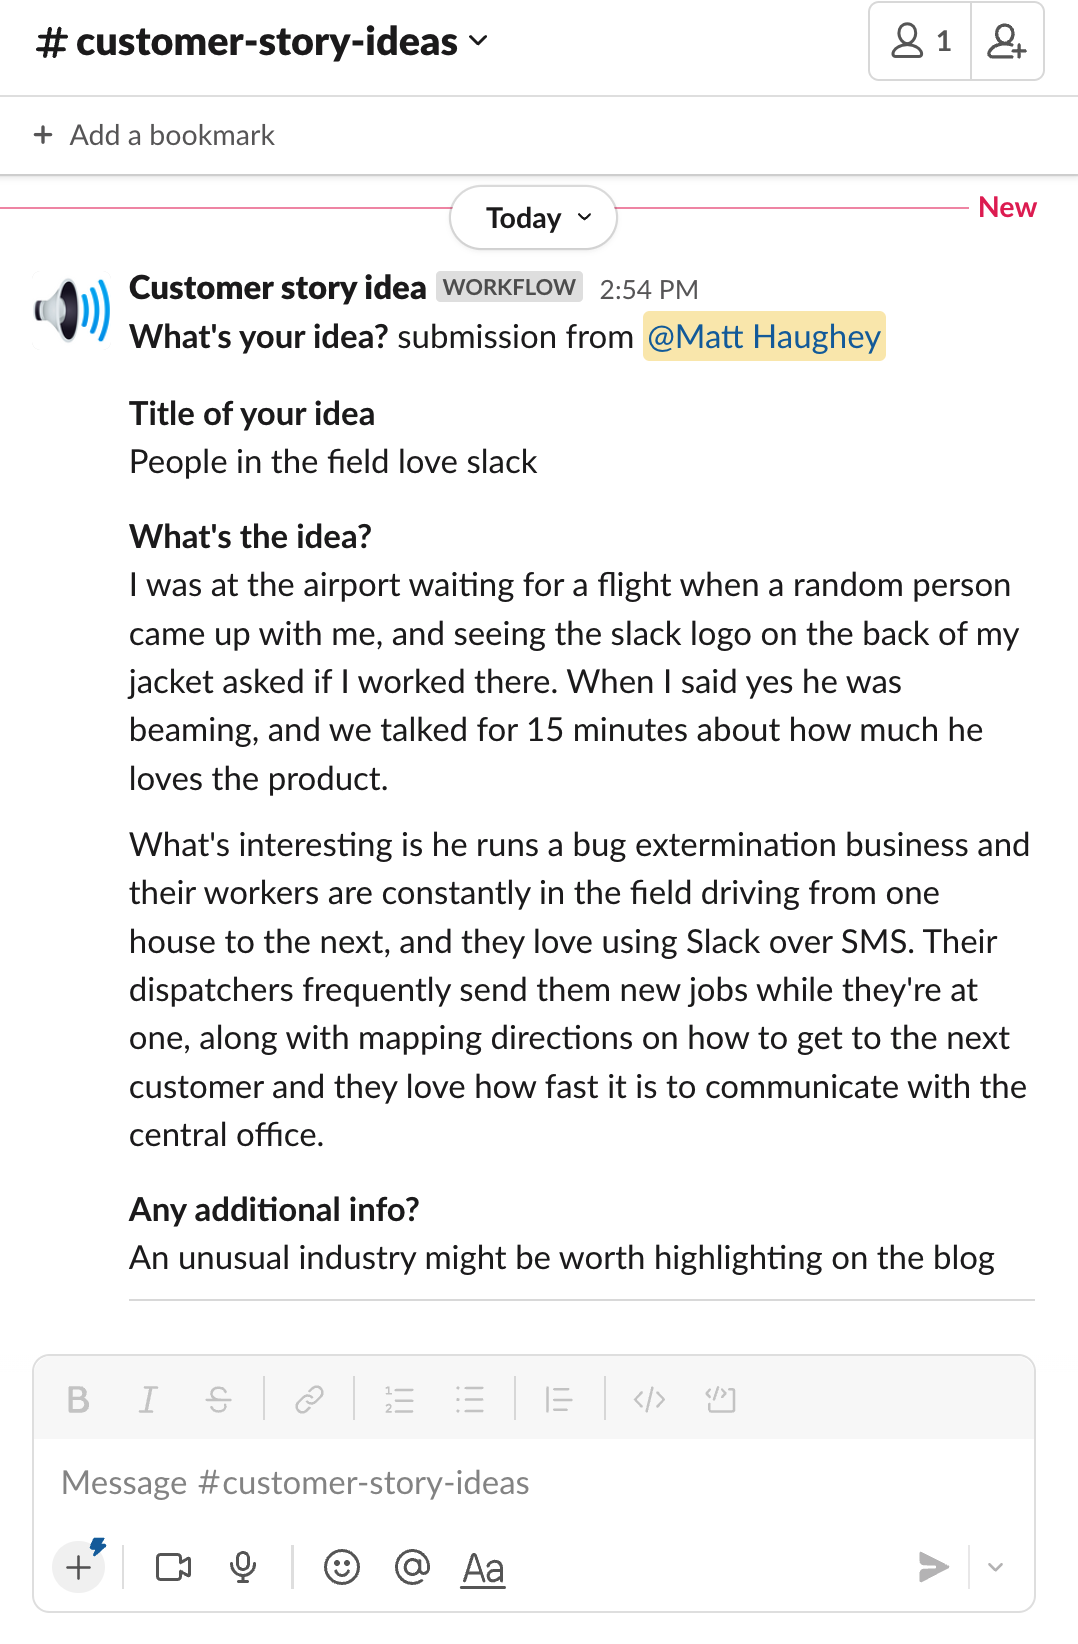 A customer story idea submitted through a Slack workflow